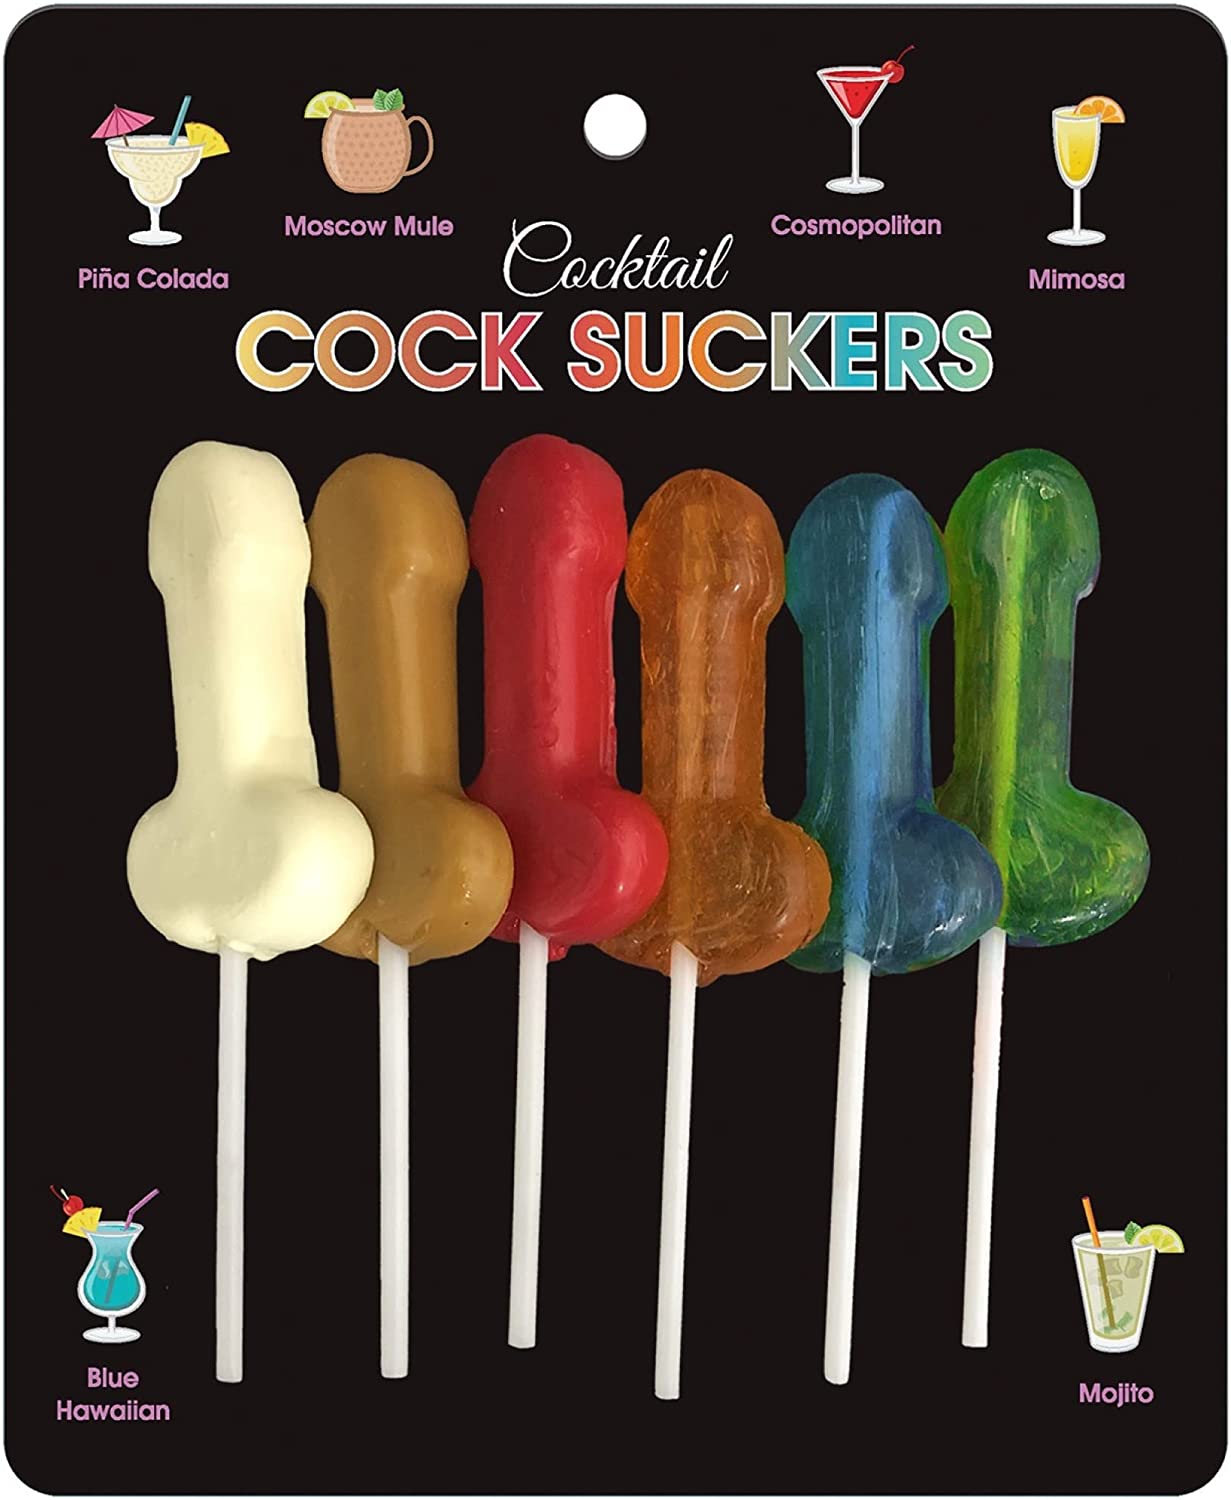 Khepher Games | Cocktail Cock Suckers 6 Pc Hens party dick straw treat duchess and daisy Australia